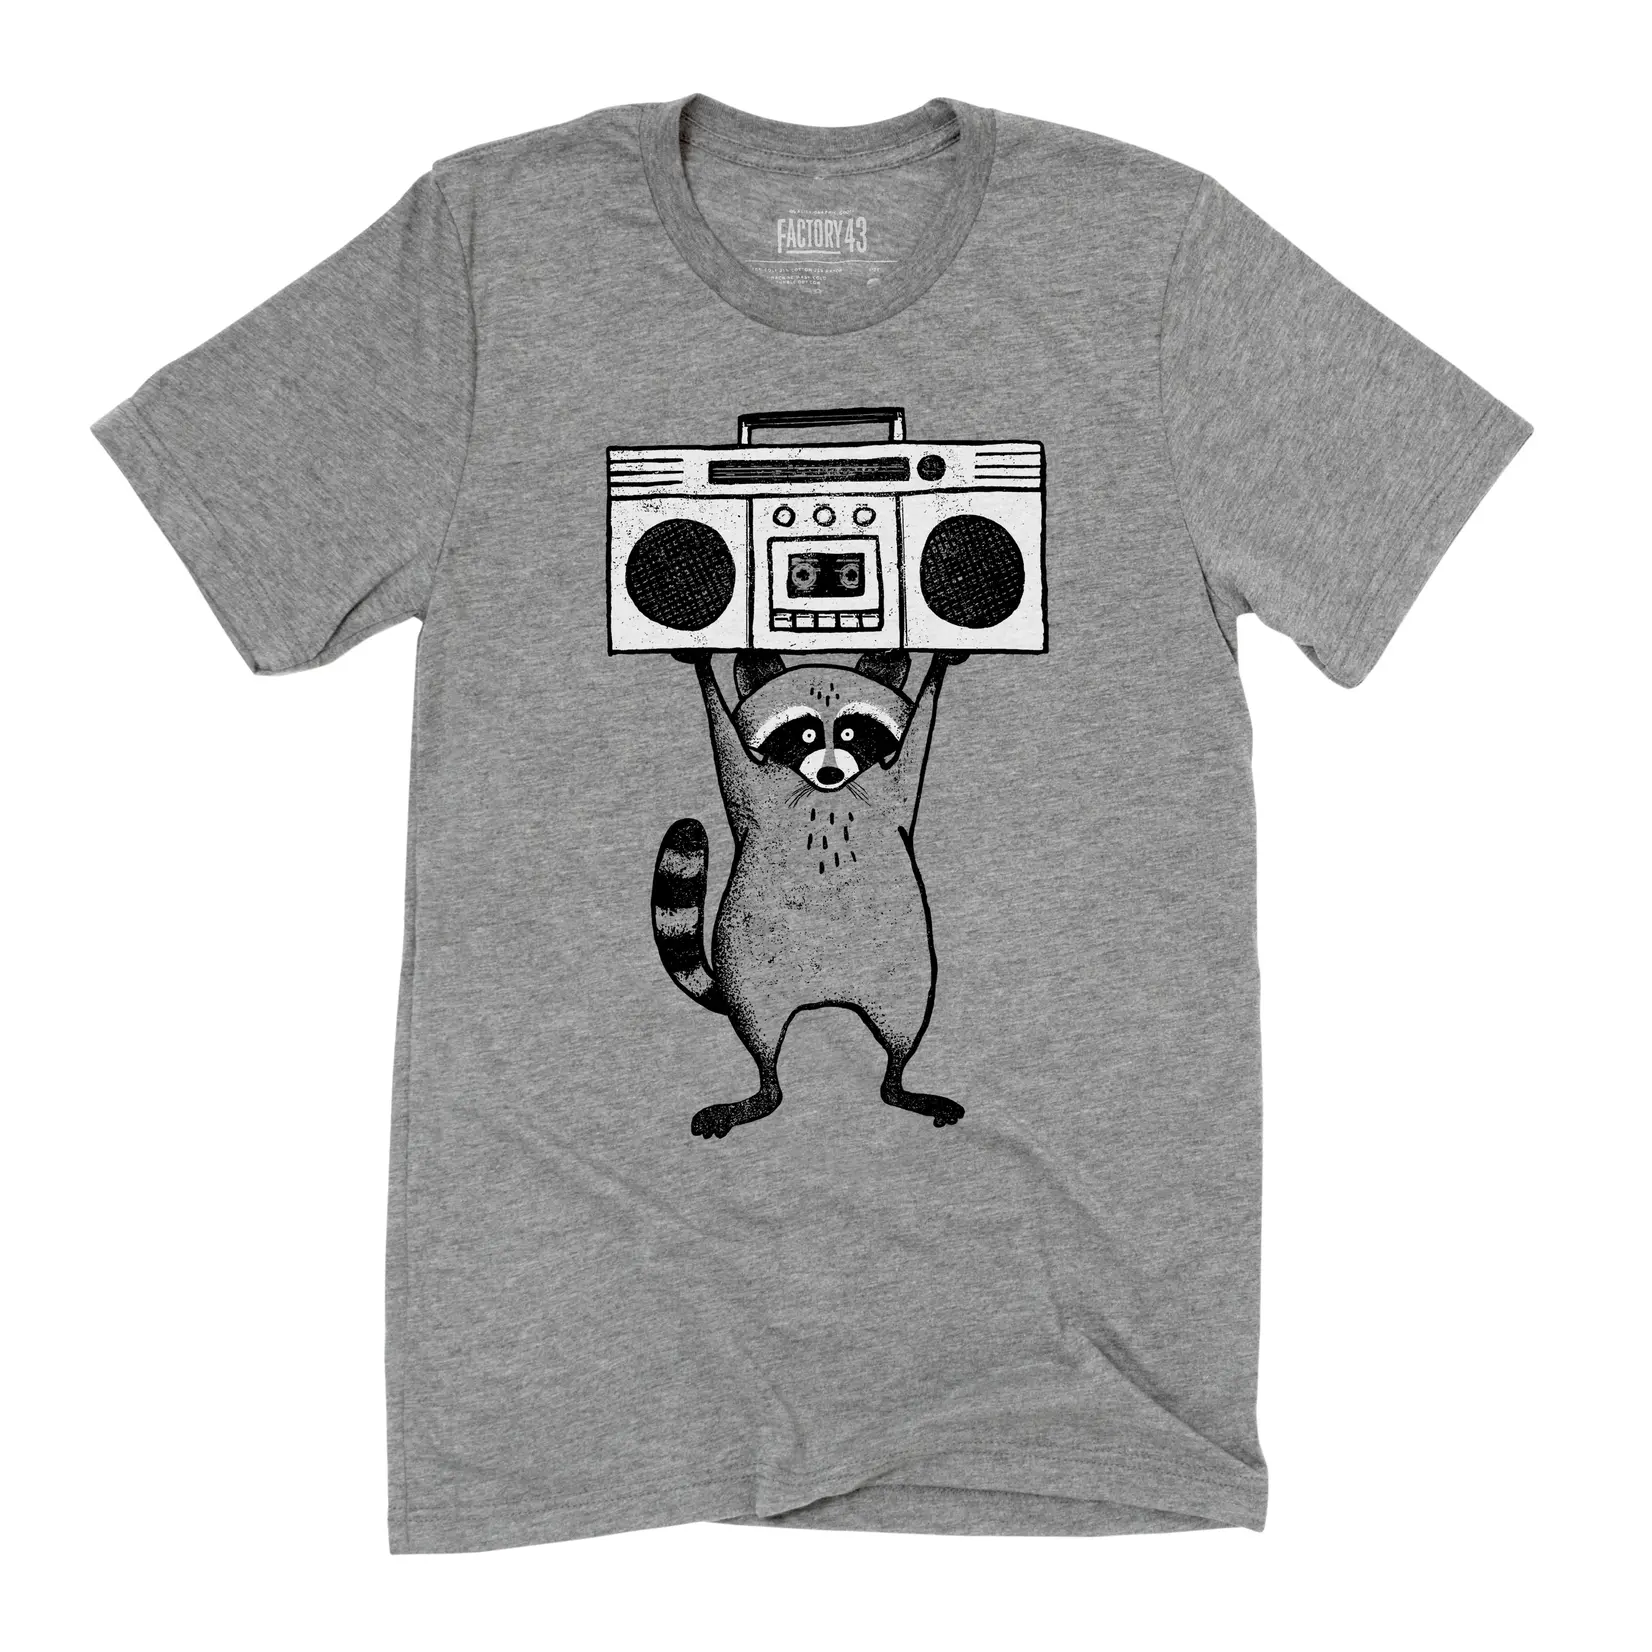 Factory 43 In Your Eyes Racoon T-Shirt